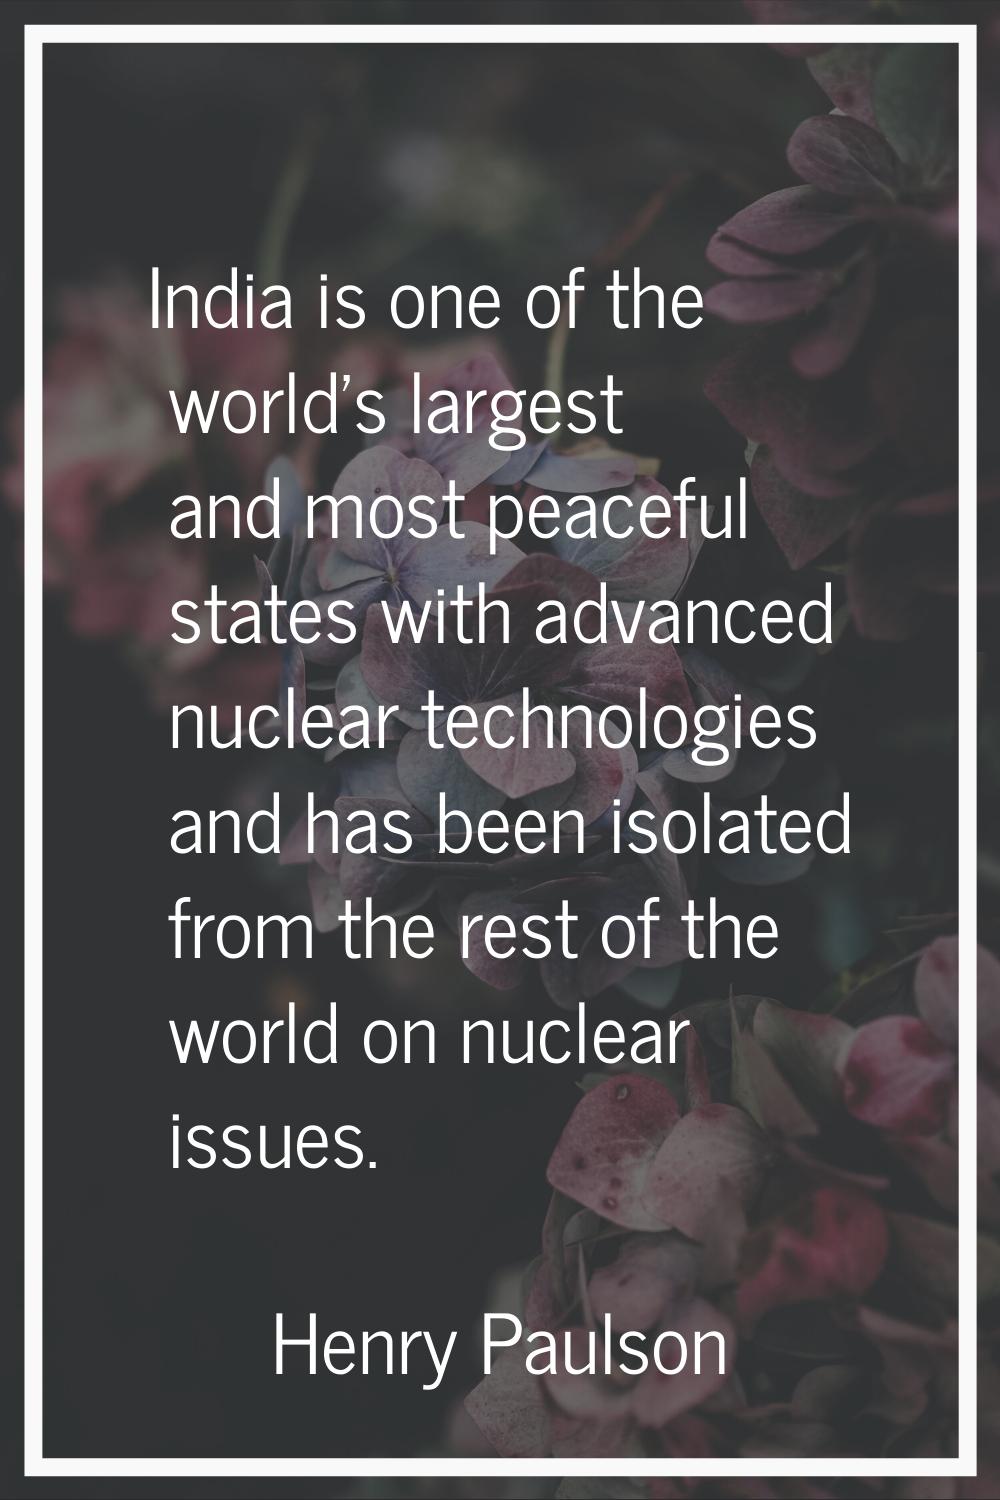 India is one of the world's largest and most peaceful states with advanced nuclear technologies and